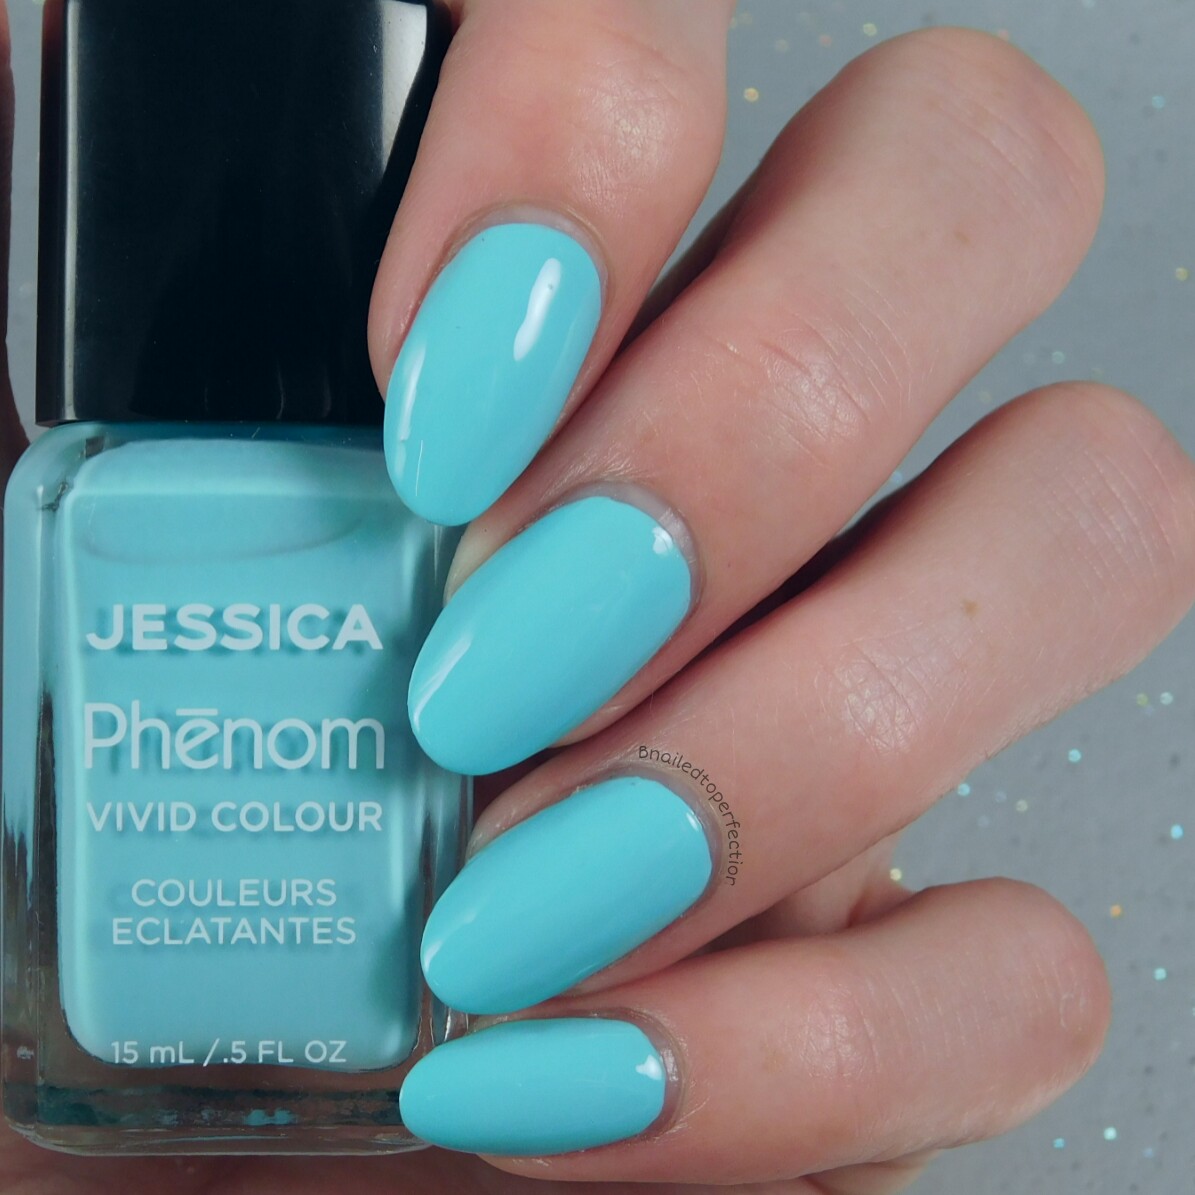 B Nailed To Perfection: Jesscia Nails - Phenom swatches and review